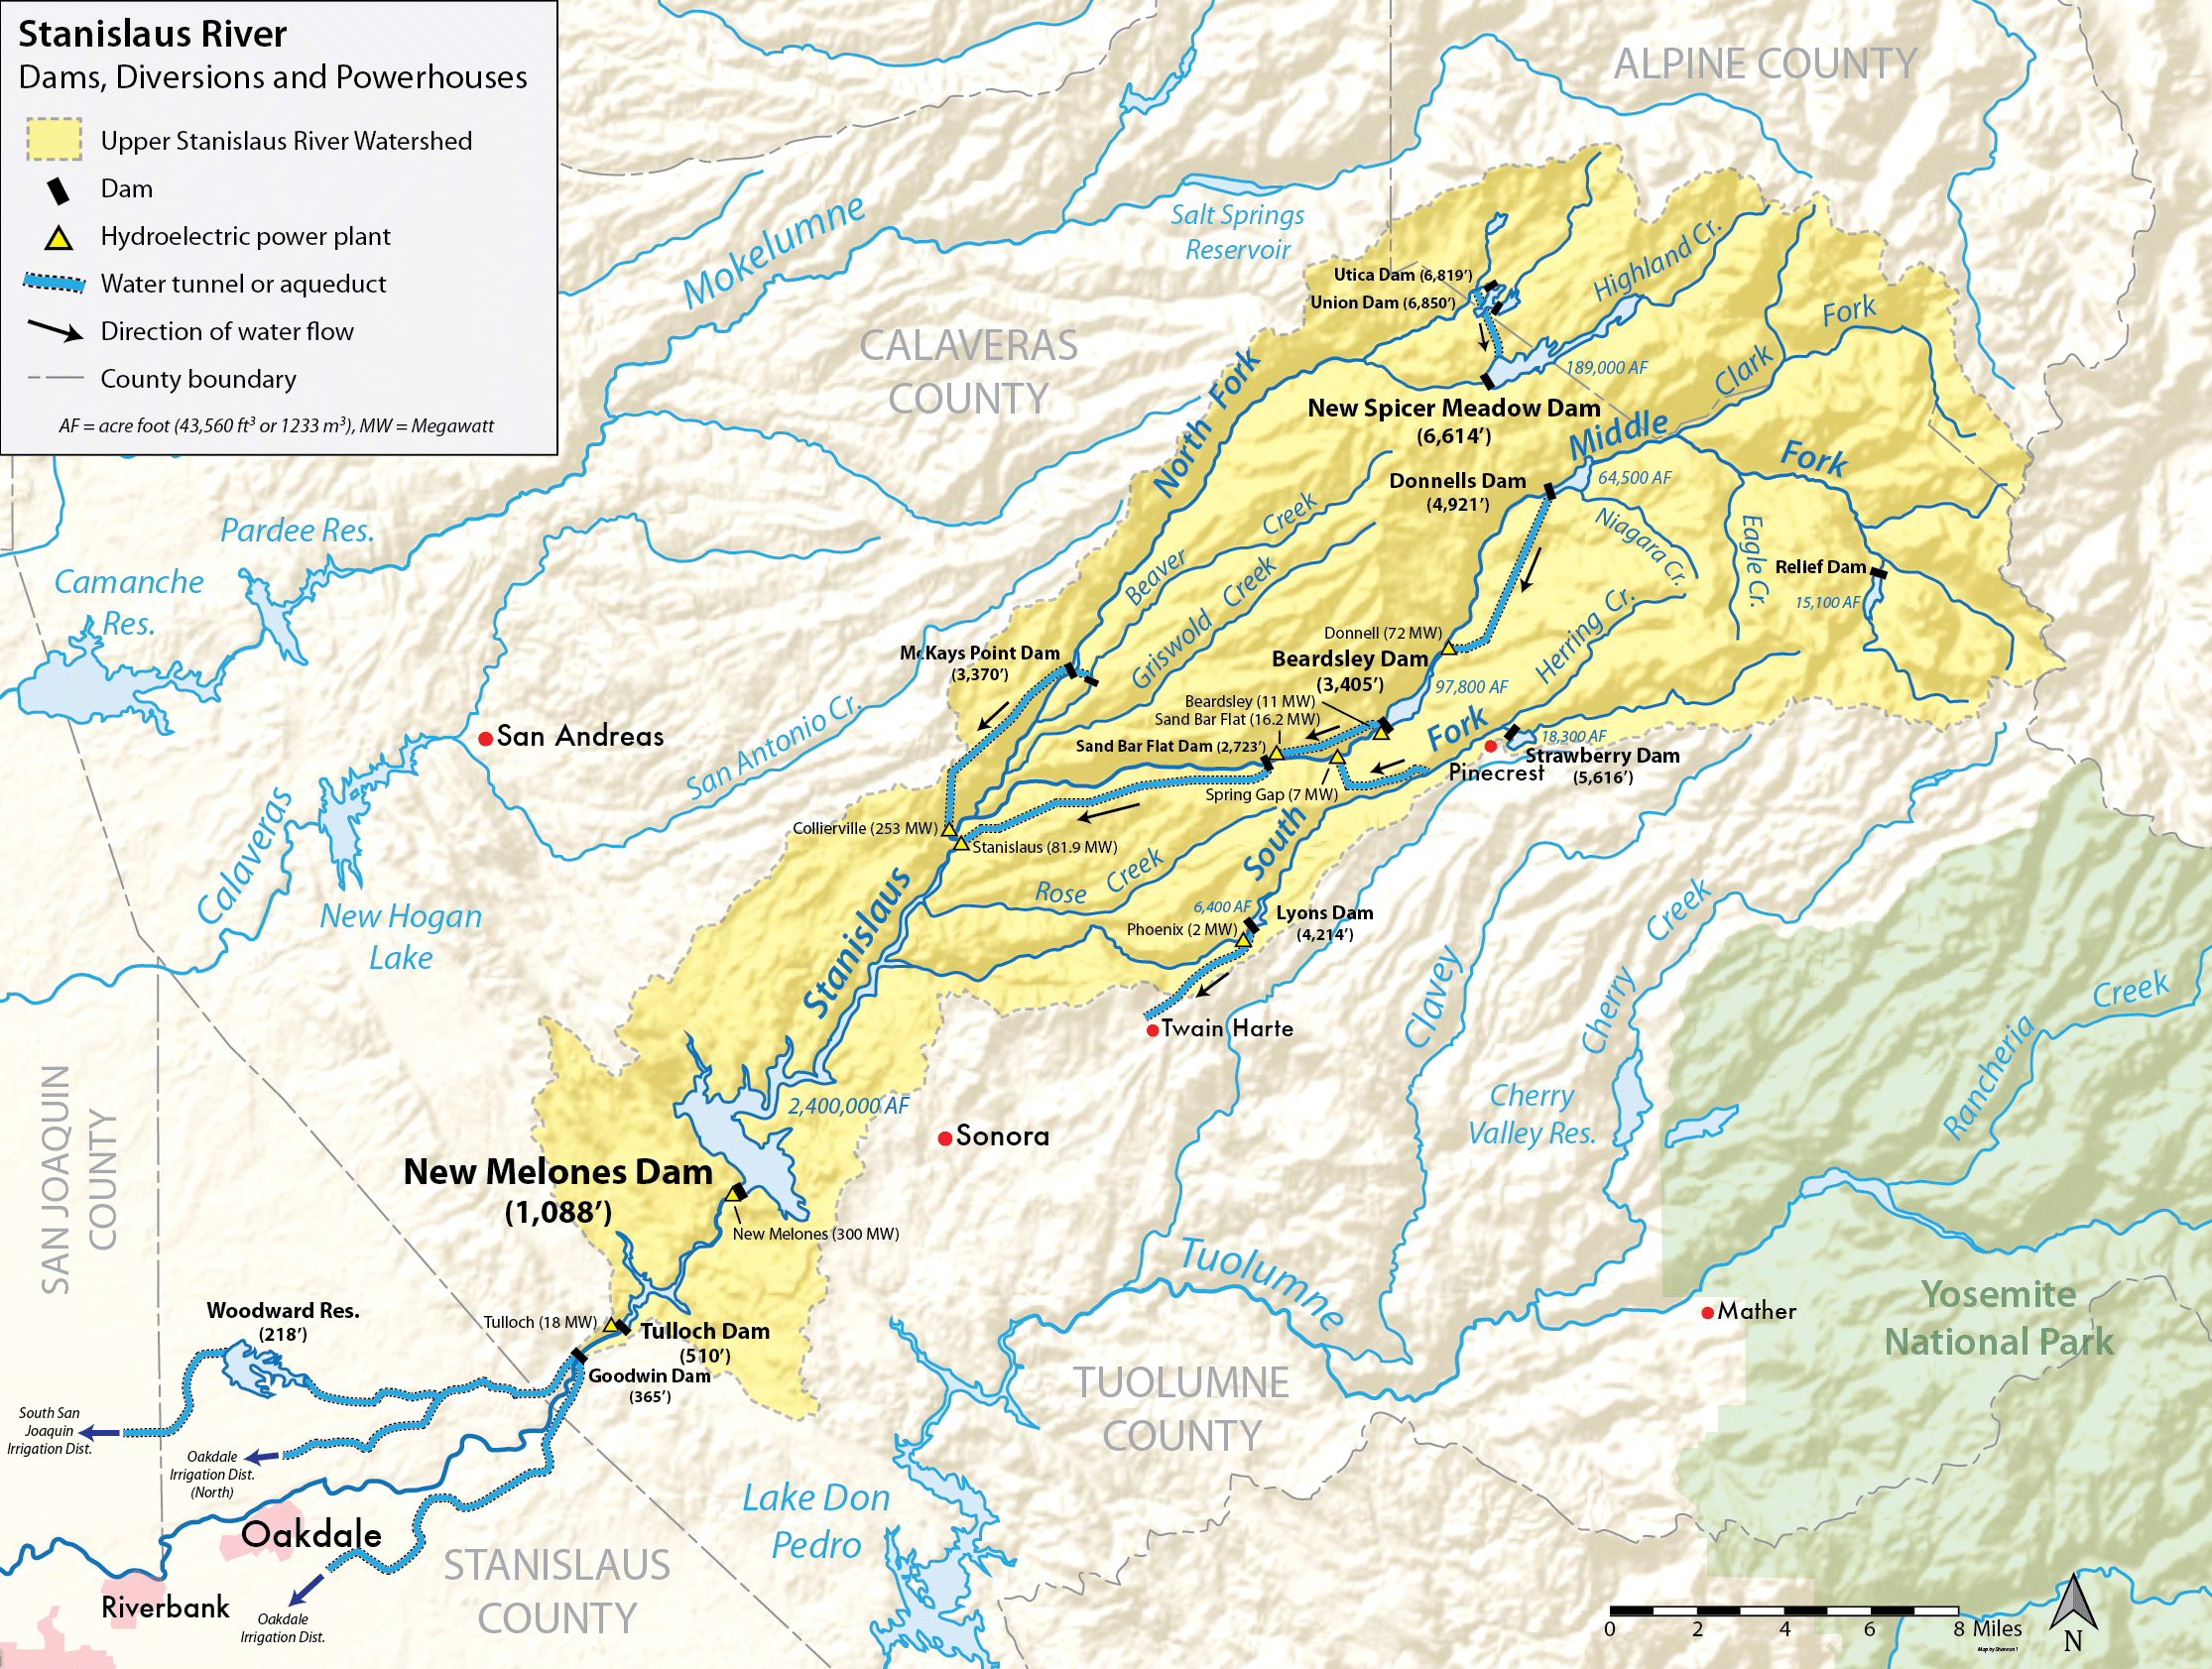 Stanislaus Watershed - courtesy of By Shannon1 - Own work, CC BY-SA 4.0, https://commons.wikimedia.org/w/index.php?curid=56959099